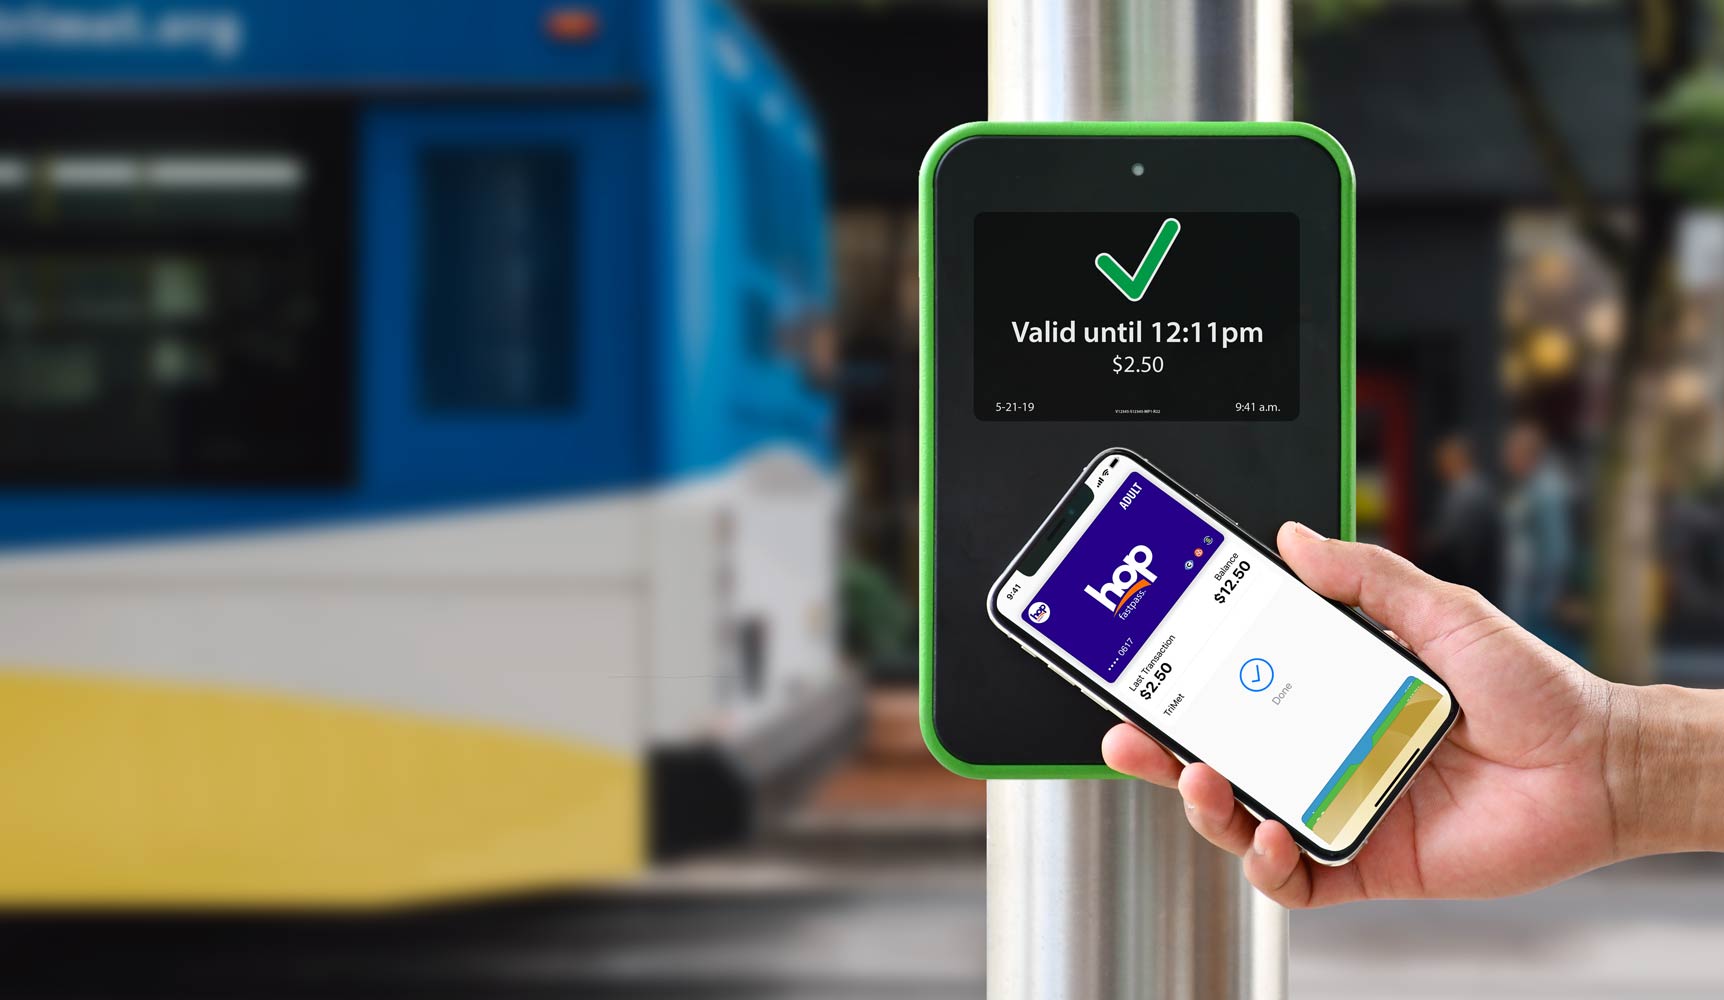 Portland, New York and London public transport will accept Apple Pay